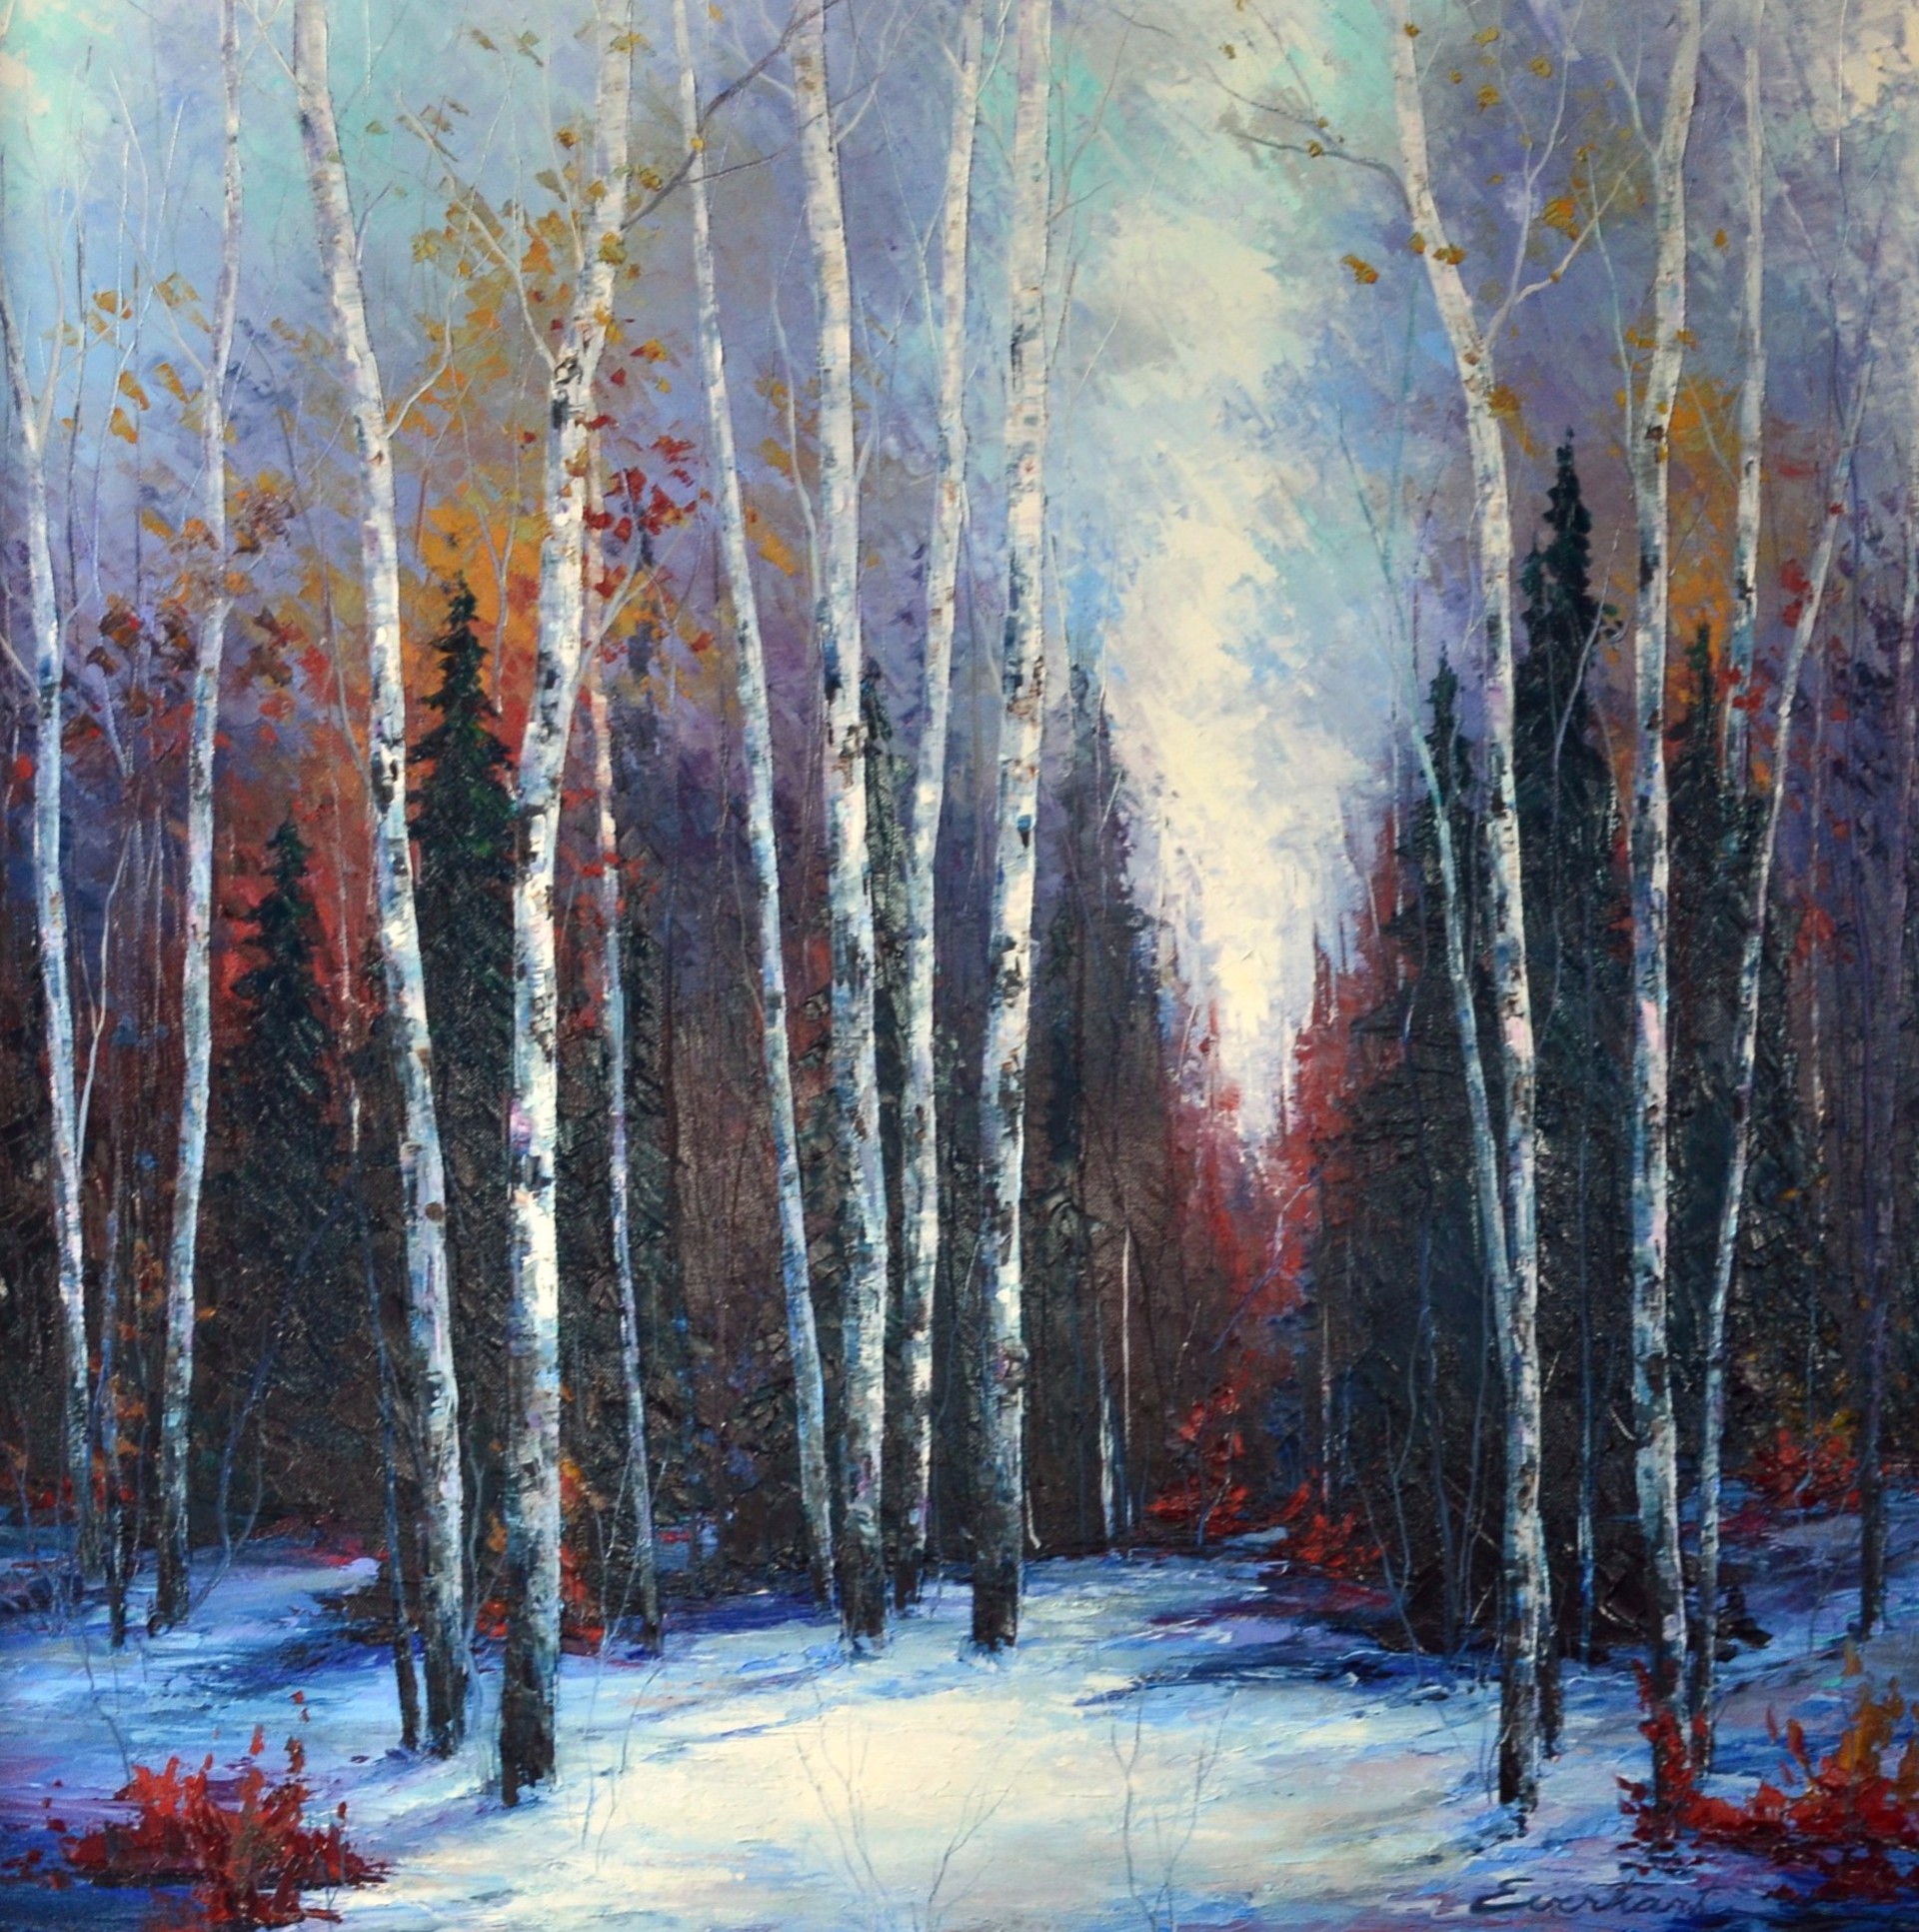 The Frosted Woods by Amy Everhart